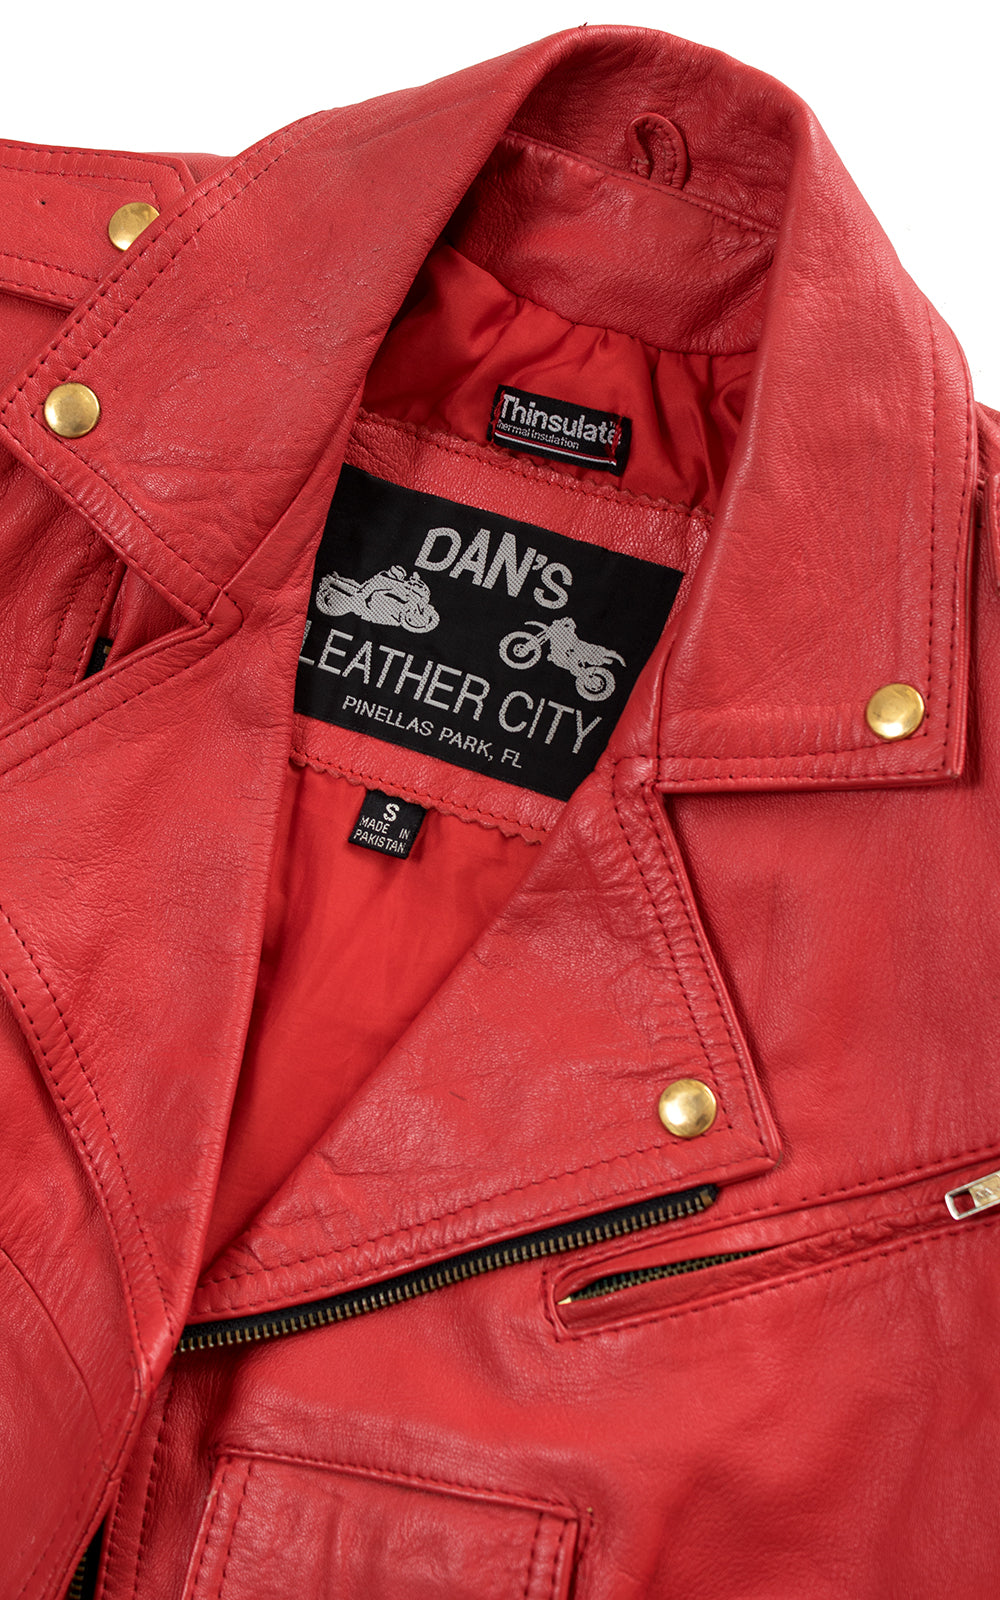 1980s Red Leather Motorcycle Jacket